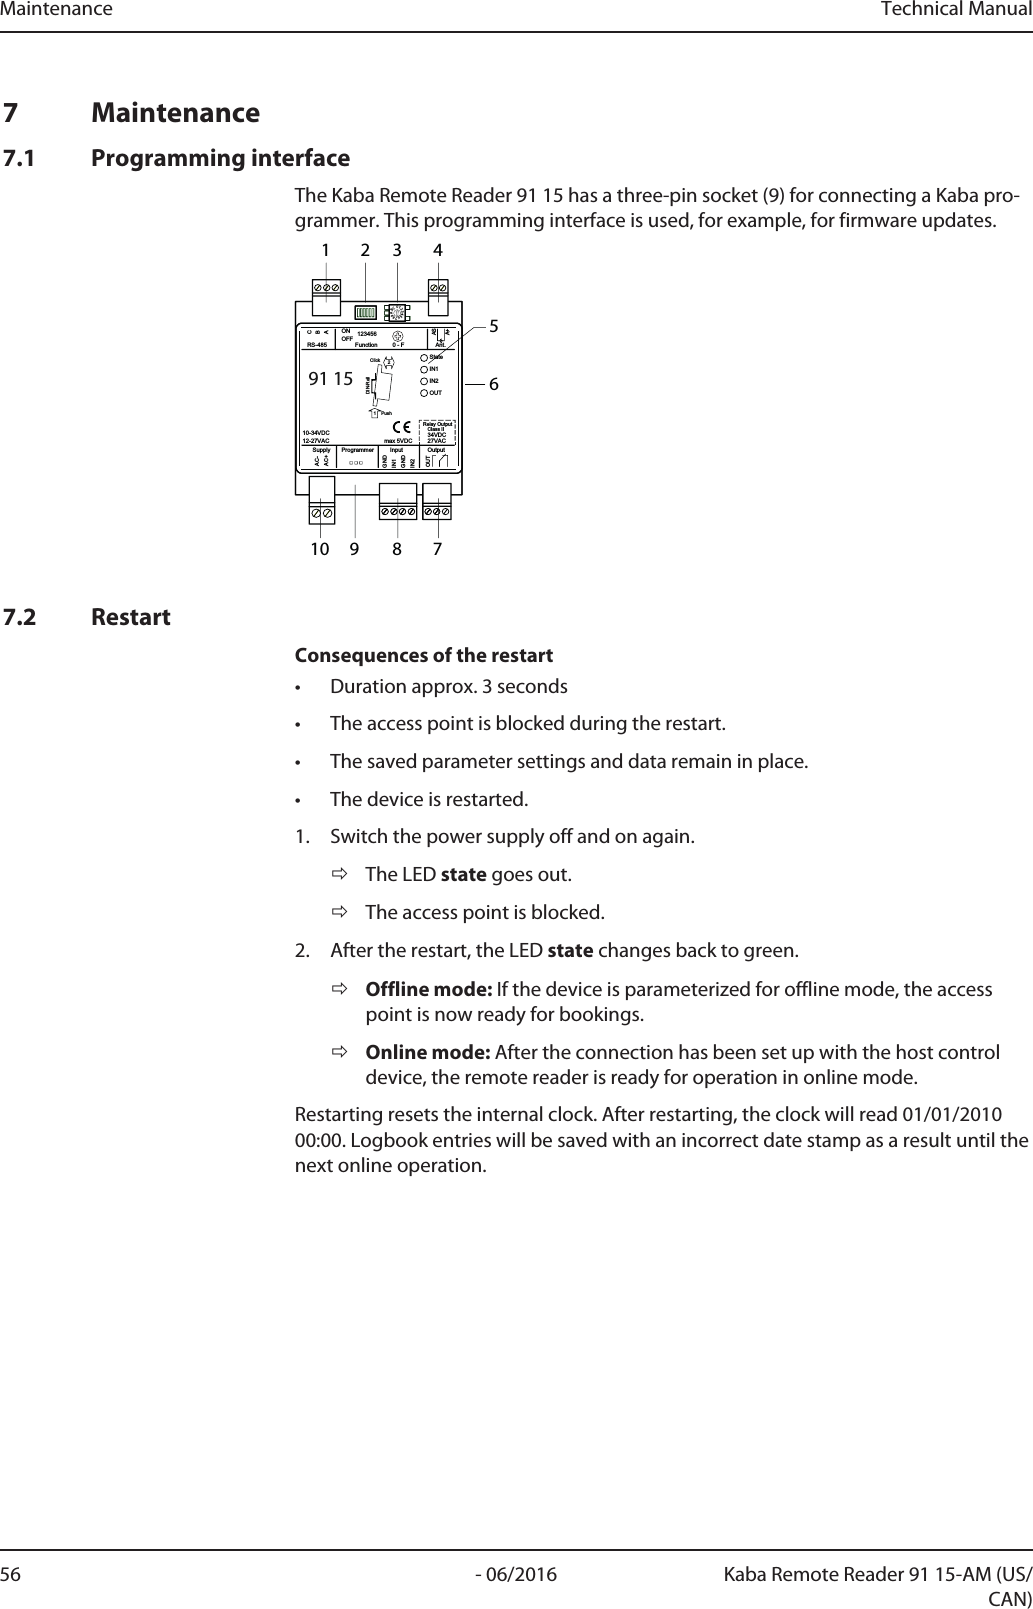 Maintenance Technical Manual56 - 06/2016 Kaba Remote Reader 91 15-AM (US/CAN)7 Maintenance7.1 Programming interfaceThe Kaba Remote Reader 91 15 has a three-pin socket (9) for connecting a Kaba pro-grammer. This programming interface is used, for example, for firmware updates.0123456789ABC91 15StateIN1IN2OUTGNDAC-AC+BACGNDIN1IN221PushClickDIN-RailASA+OUTOutputAnt.Function 0 - F123456ONOFFRS-485InputProgrammerSupply10-34VDC12-27VAC 34VDCClass IIRelay Output27VACmax 5VDC1 2 3 456789107.2 RestartConsequences of the restart• Duration approx. 3 seconds• The access point is blocked during the restart.• The saved parameter settings and data remain in place.• The device is restarted.1. Switch the power supply off and on again.ðThe LED state goes out.ðThe access point is blocked.2. After the restart, the LED state changes back to green.ðOffline mode: If the device is parameterized for offline mode, the accesspoint is now ready for bookings.ðOnline mode: After the connection has been set up with the host controldevice, the remote reader is ready for operation in online mode.Restarting resets the internal clock. After restarting, the clock will read 01/01/201000:00. Logbook entries will be saved with an incorrect date stamp as a result until thenext online operation.